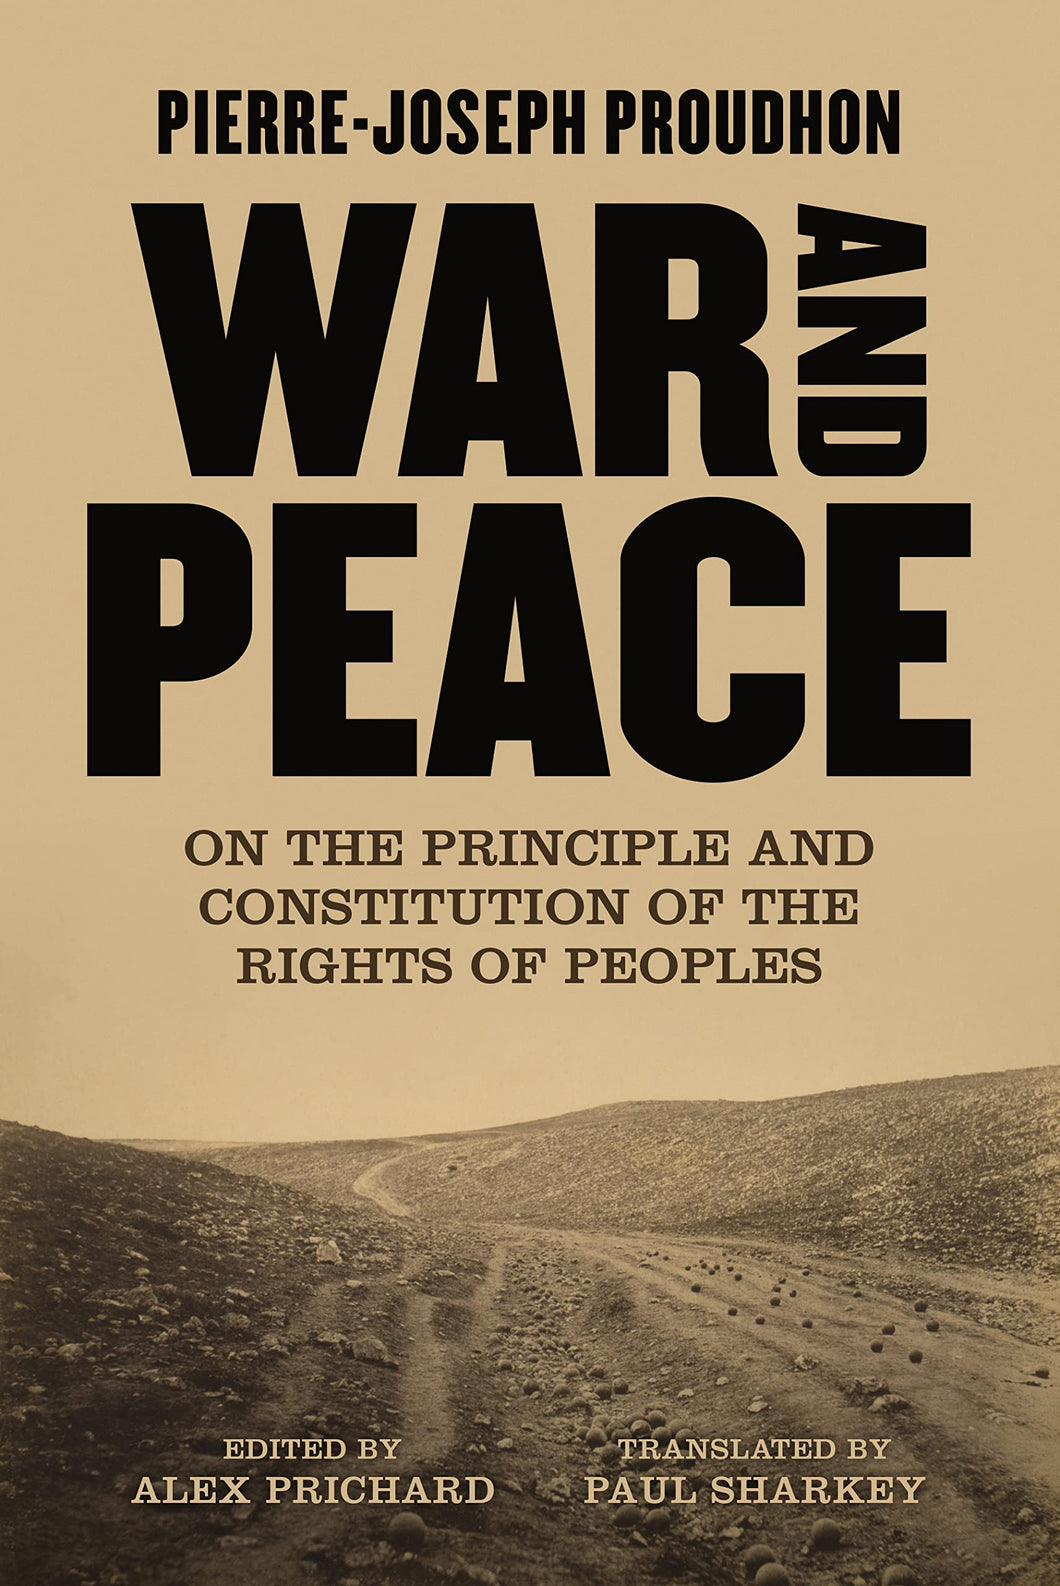 War and Peace: On the Principle and Constitution of the Rights of Peoples by Pierre-Joseph Proudhon